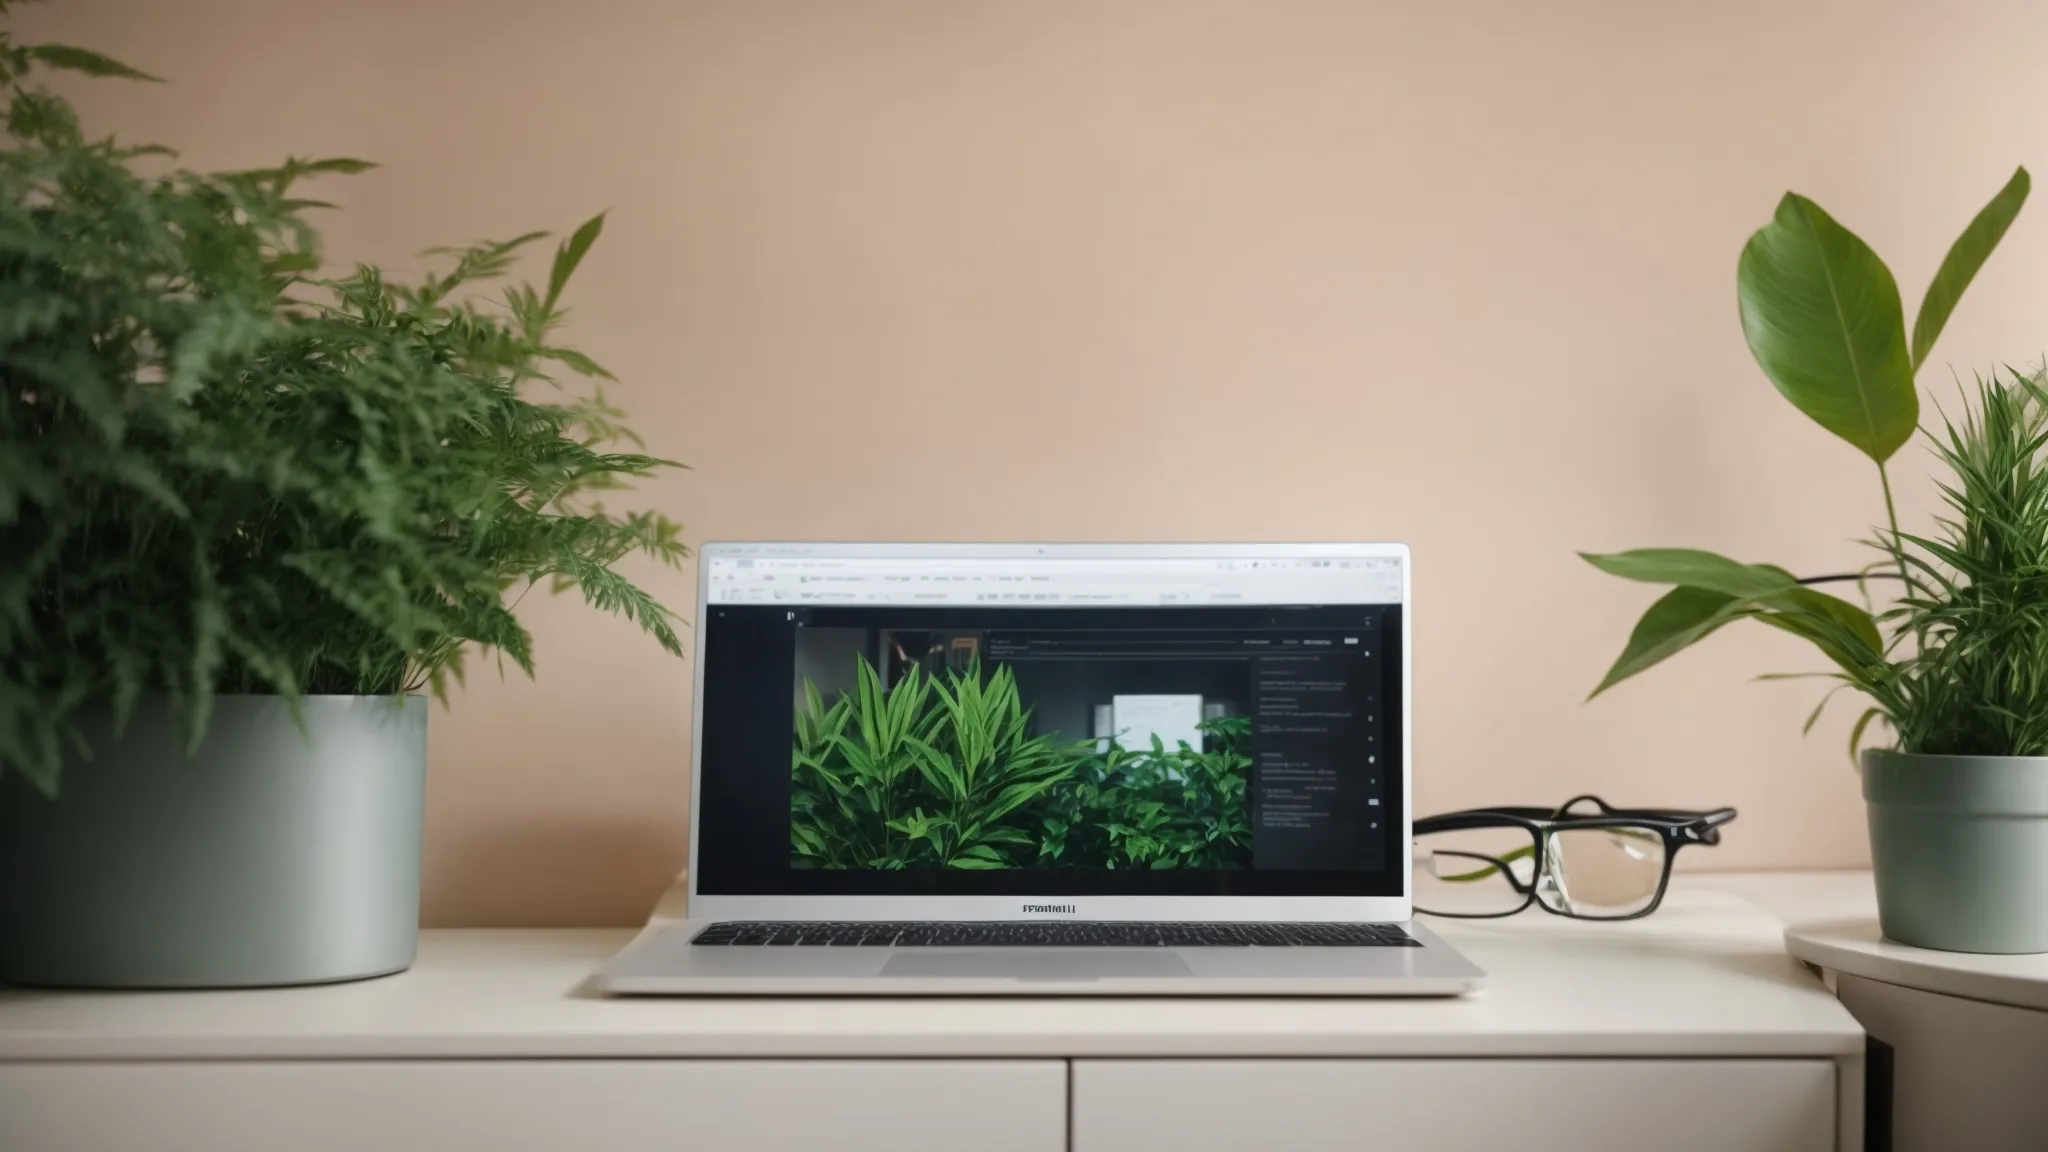 a laptop with articles on the screen, set against the backdrop of a small plant to symbolize sustainability and technology merging.